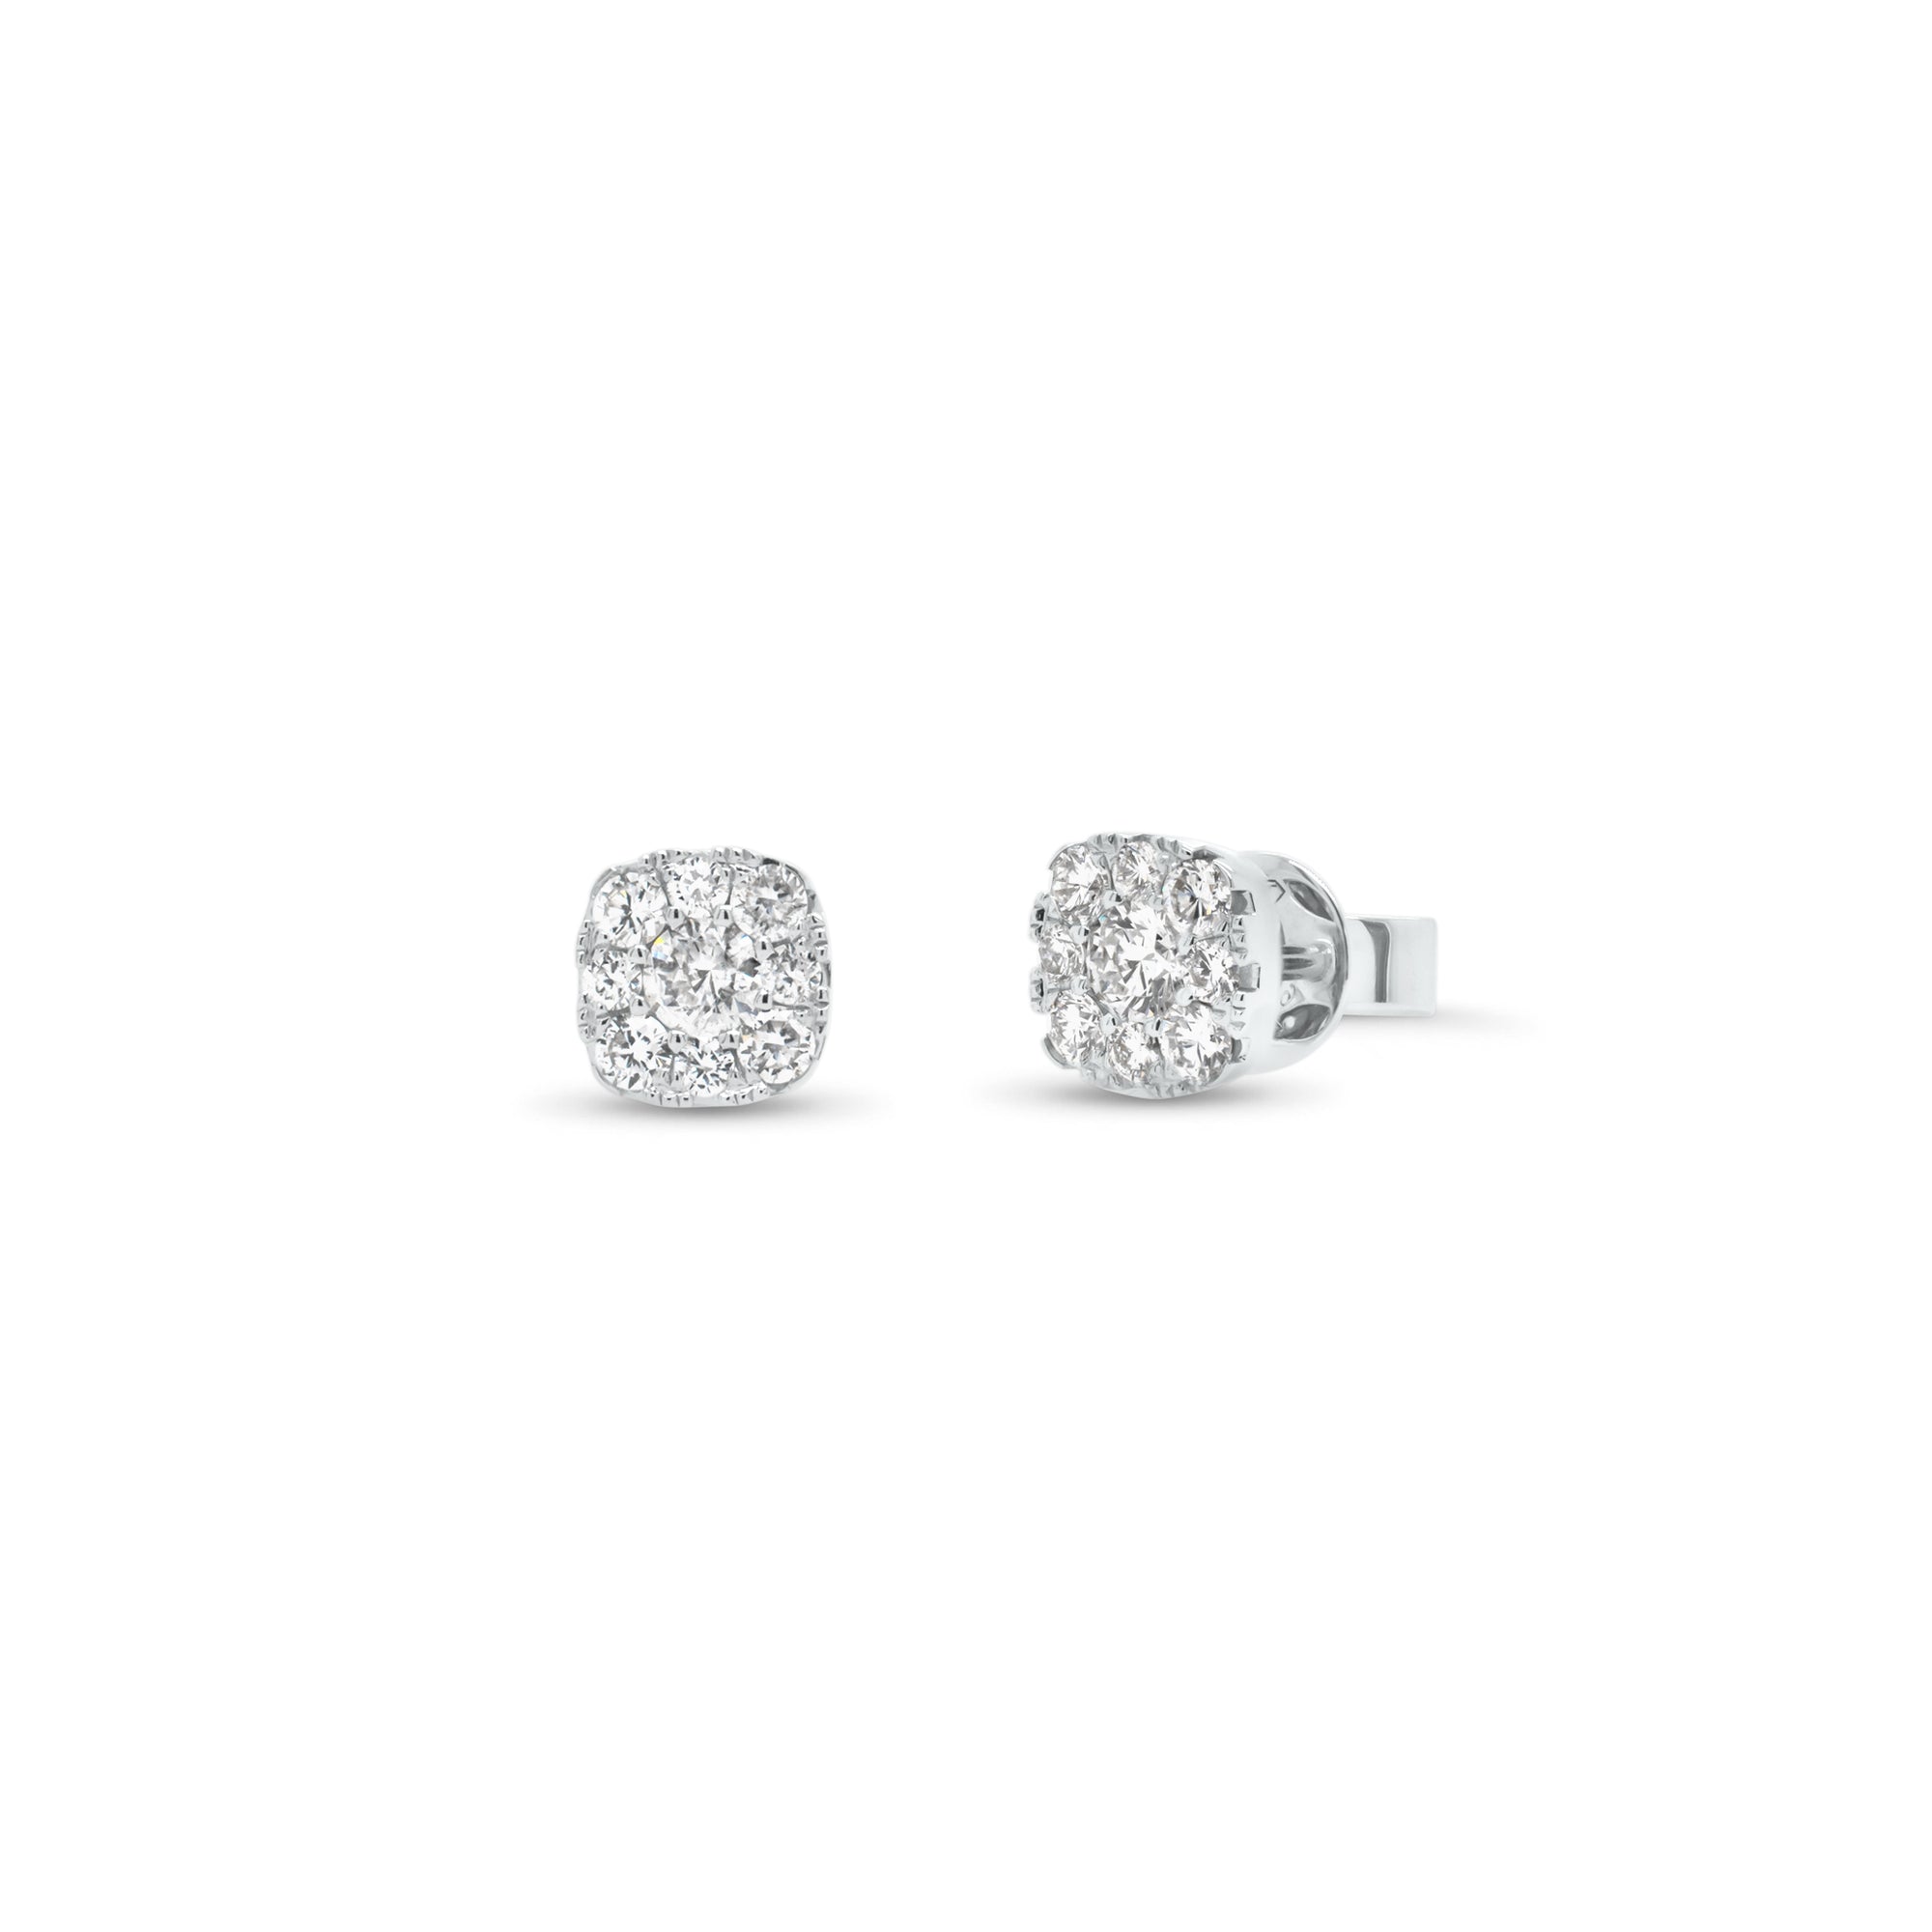 Diamond Cushion Stud Earrings - 14k gold weighing 1.48 grams   - 18 round diamonds with 0.33 total carat weight